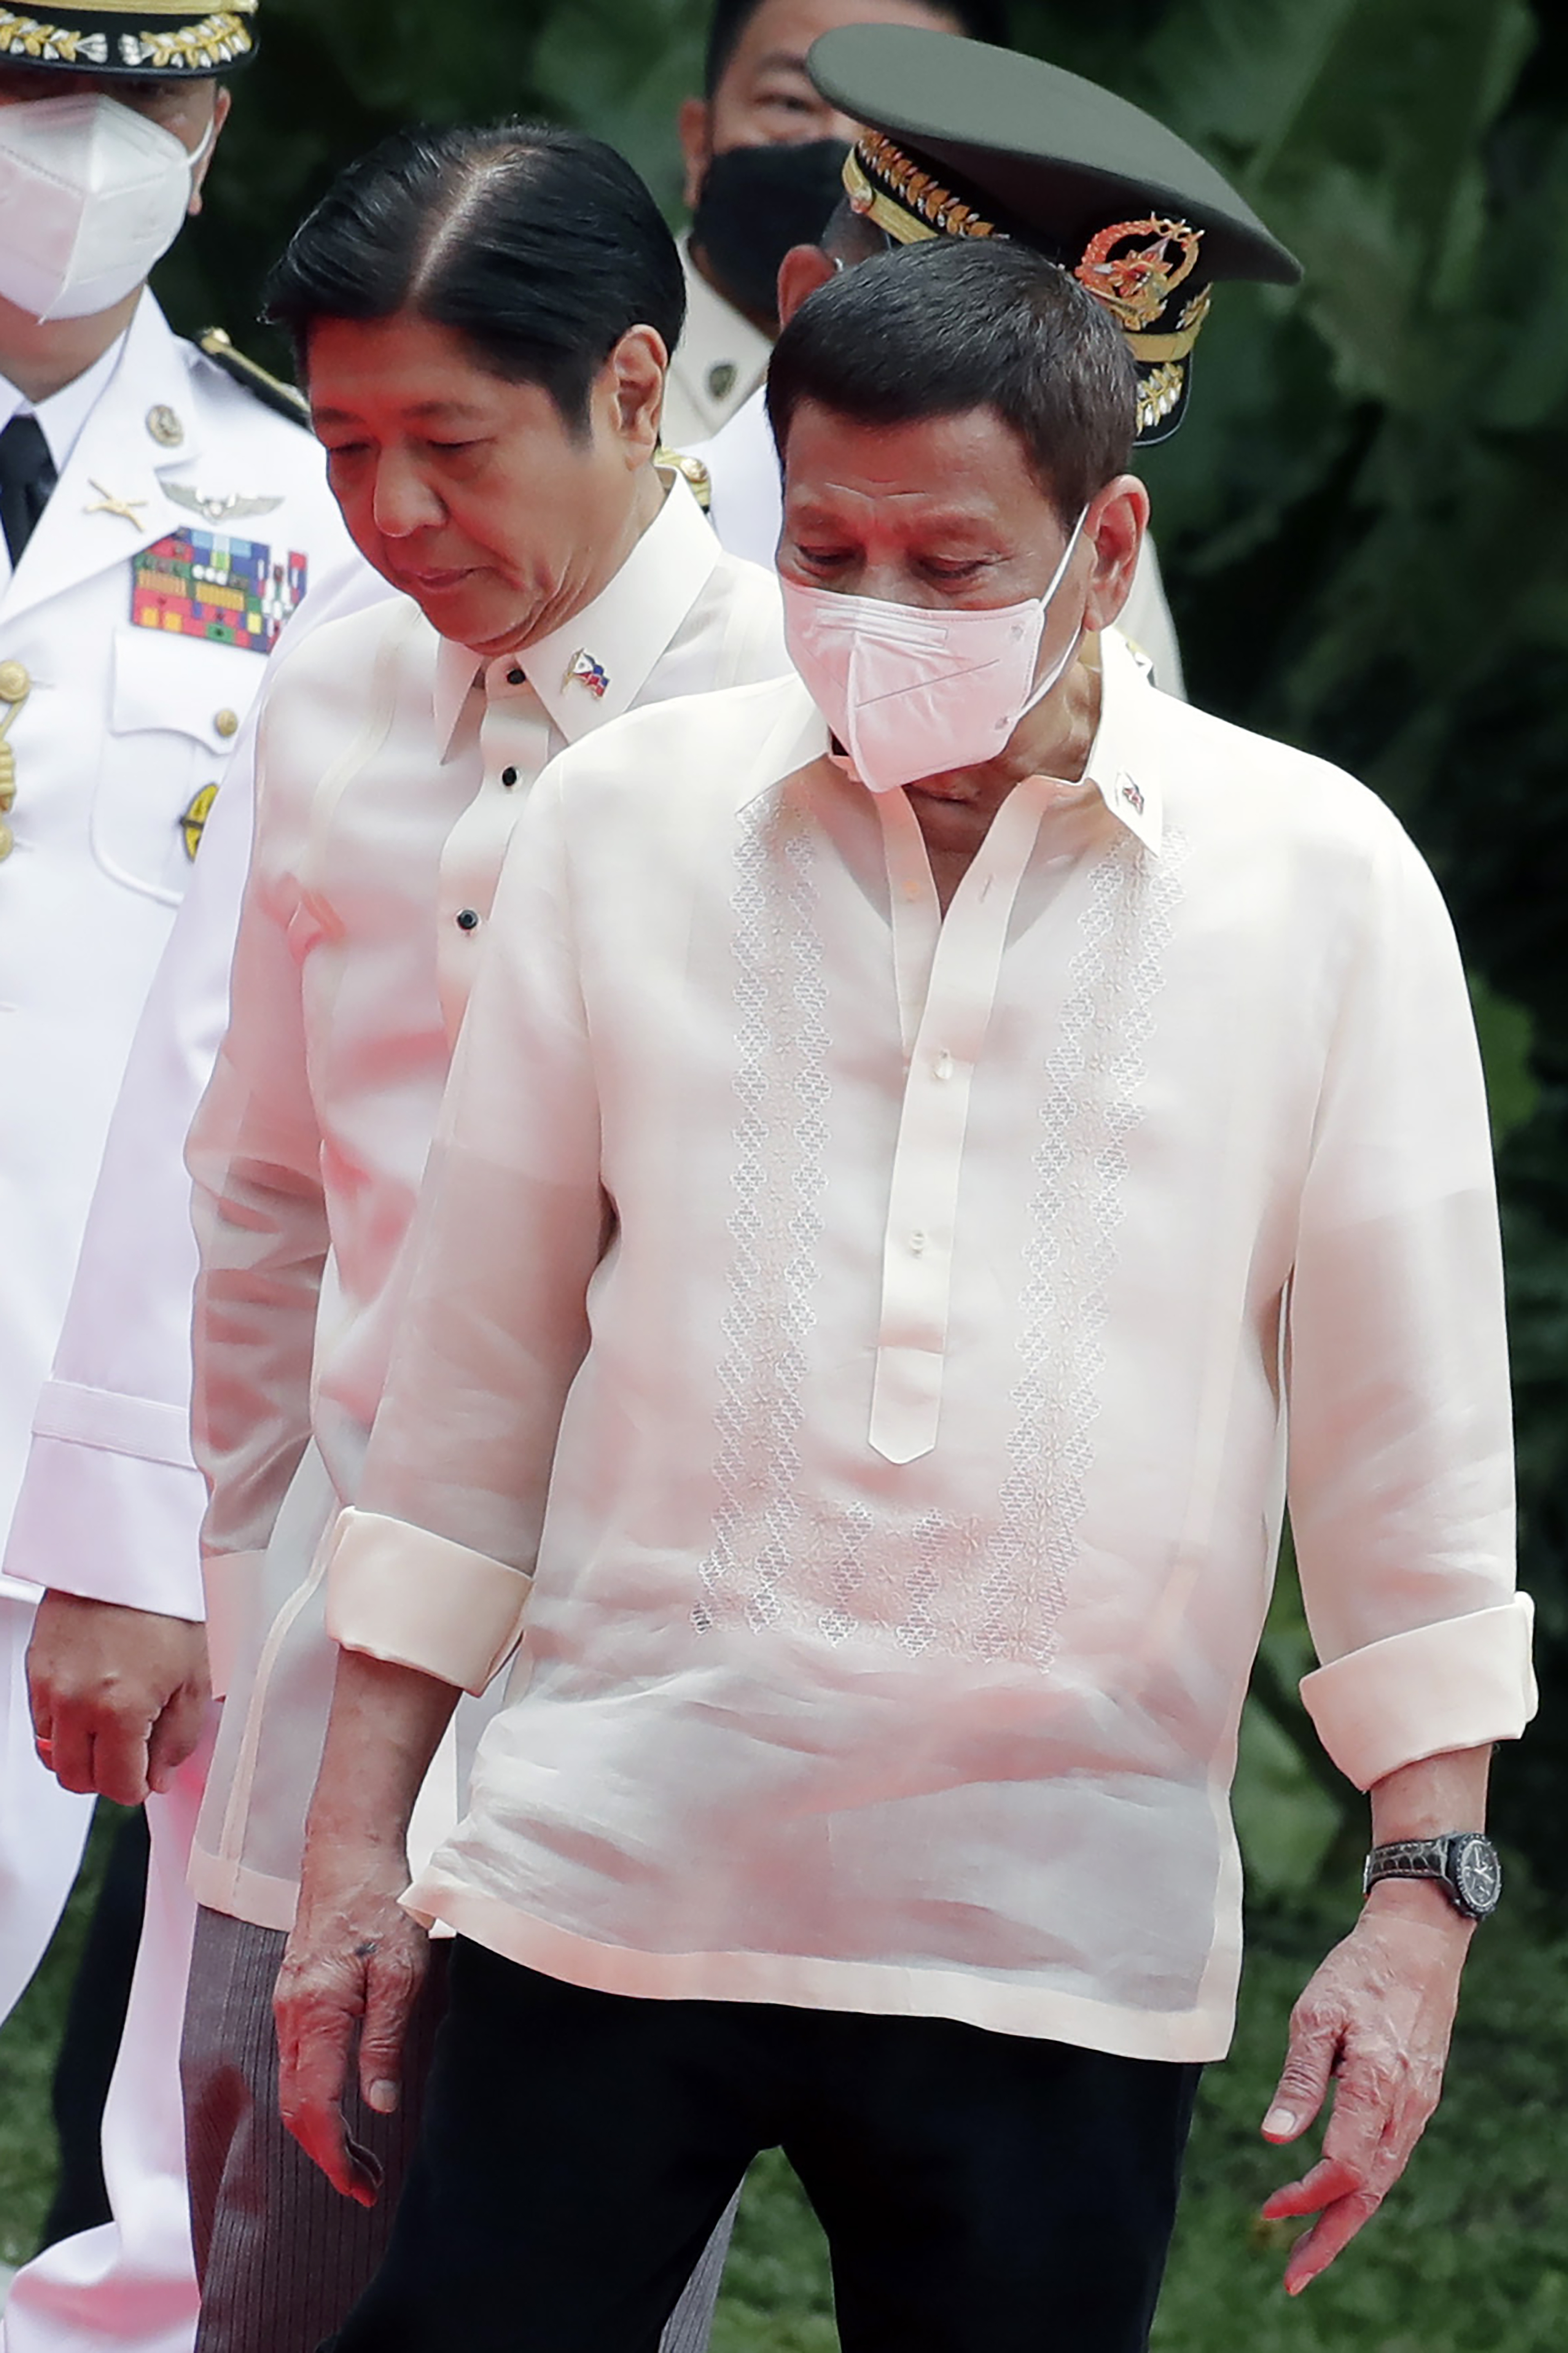 Incoming Philippine President Ferdinand Marcos Jr., left, and outgoing President Rodrigo Duterte, right, attend Marcos' inauguration ceremony at the Malacanang presidential palace grounds in Manila, Philippines, on June 30, 2022. (Francis R. Malasig—AP)